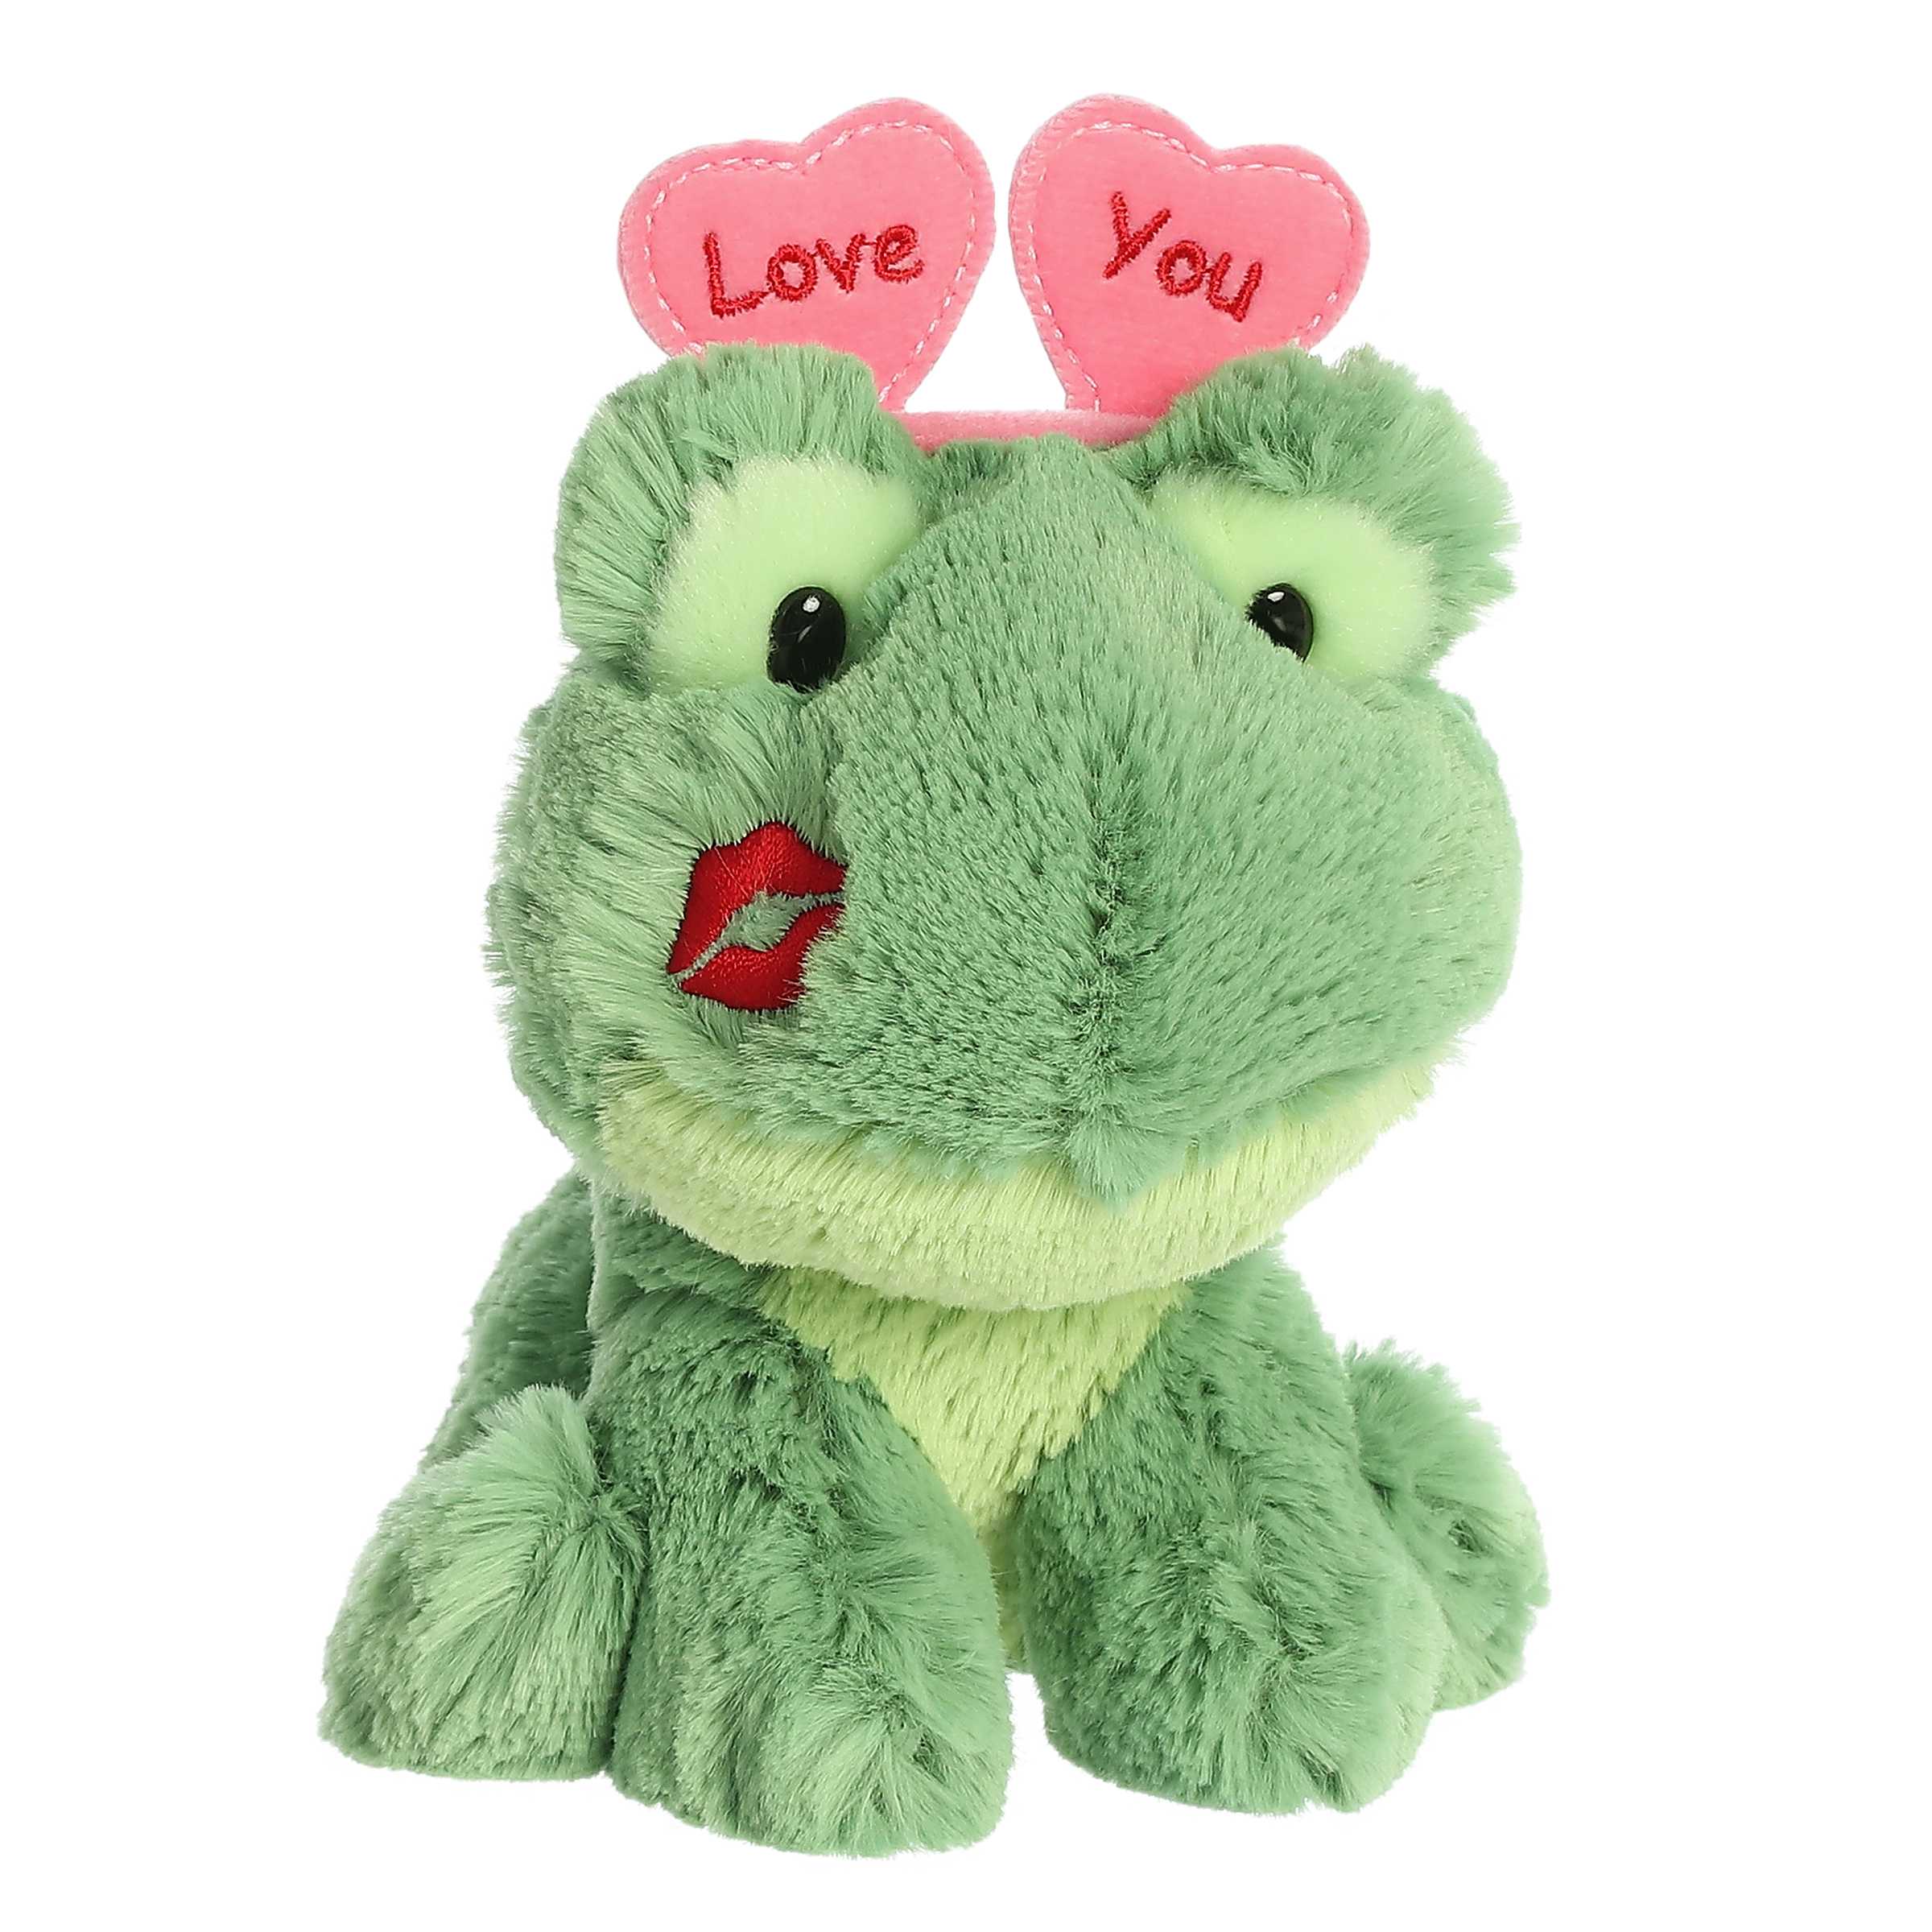 Aurora® - Love On The Mind™ - 6" Love You Frog™